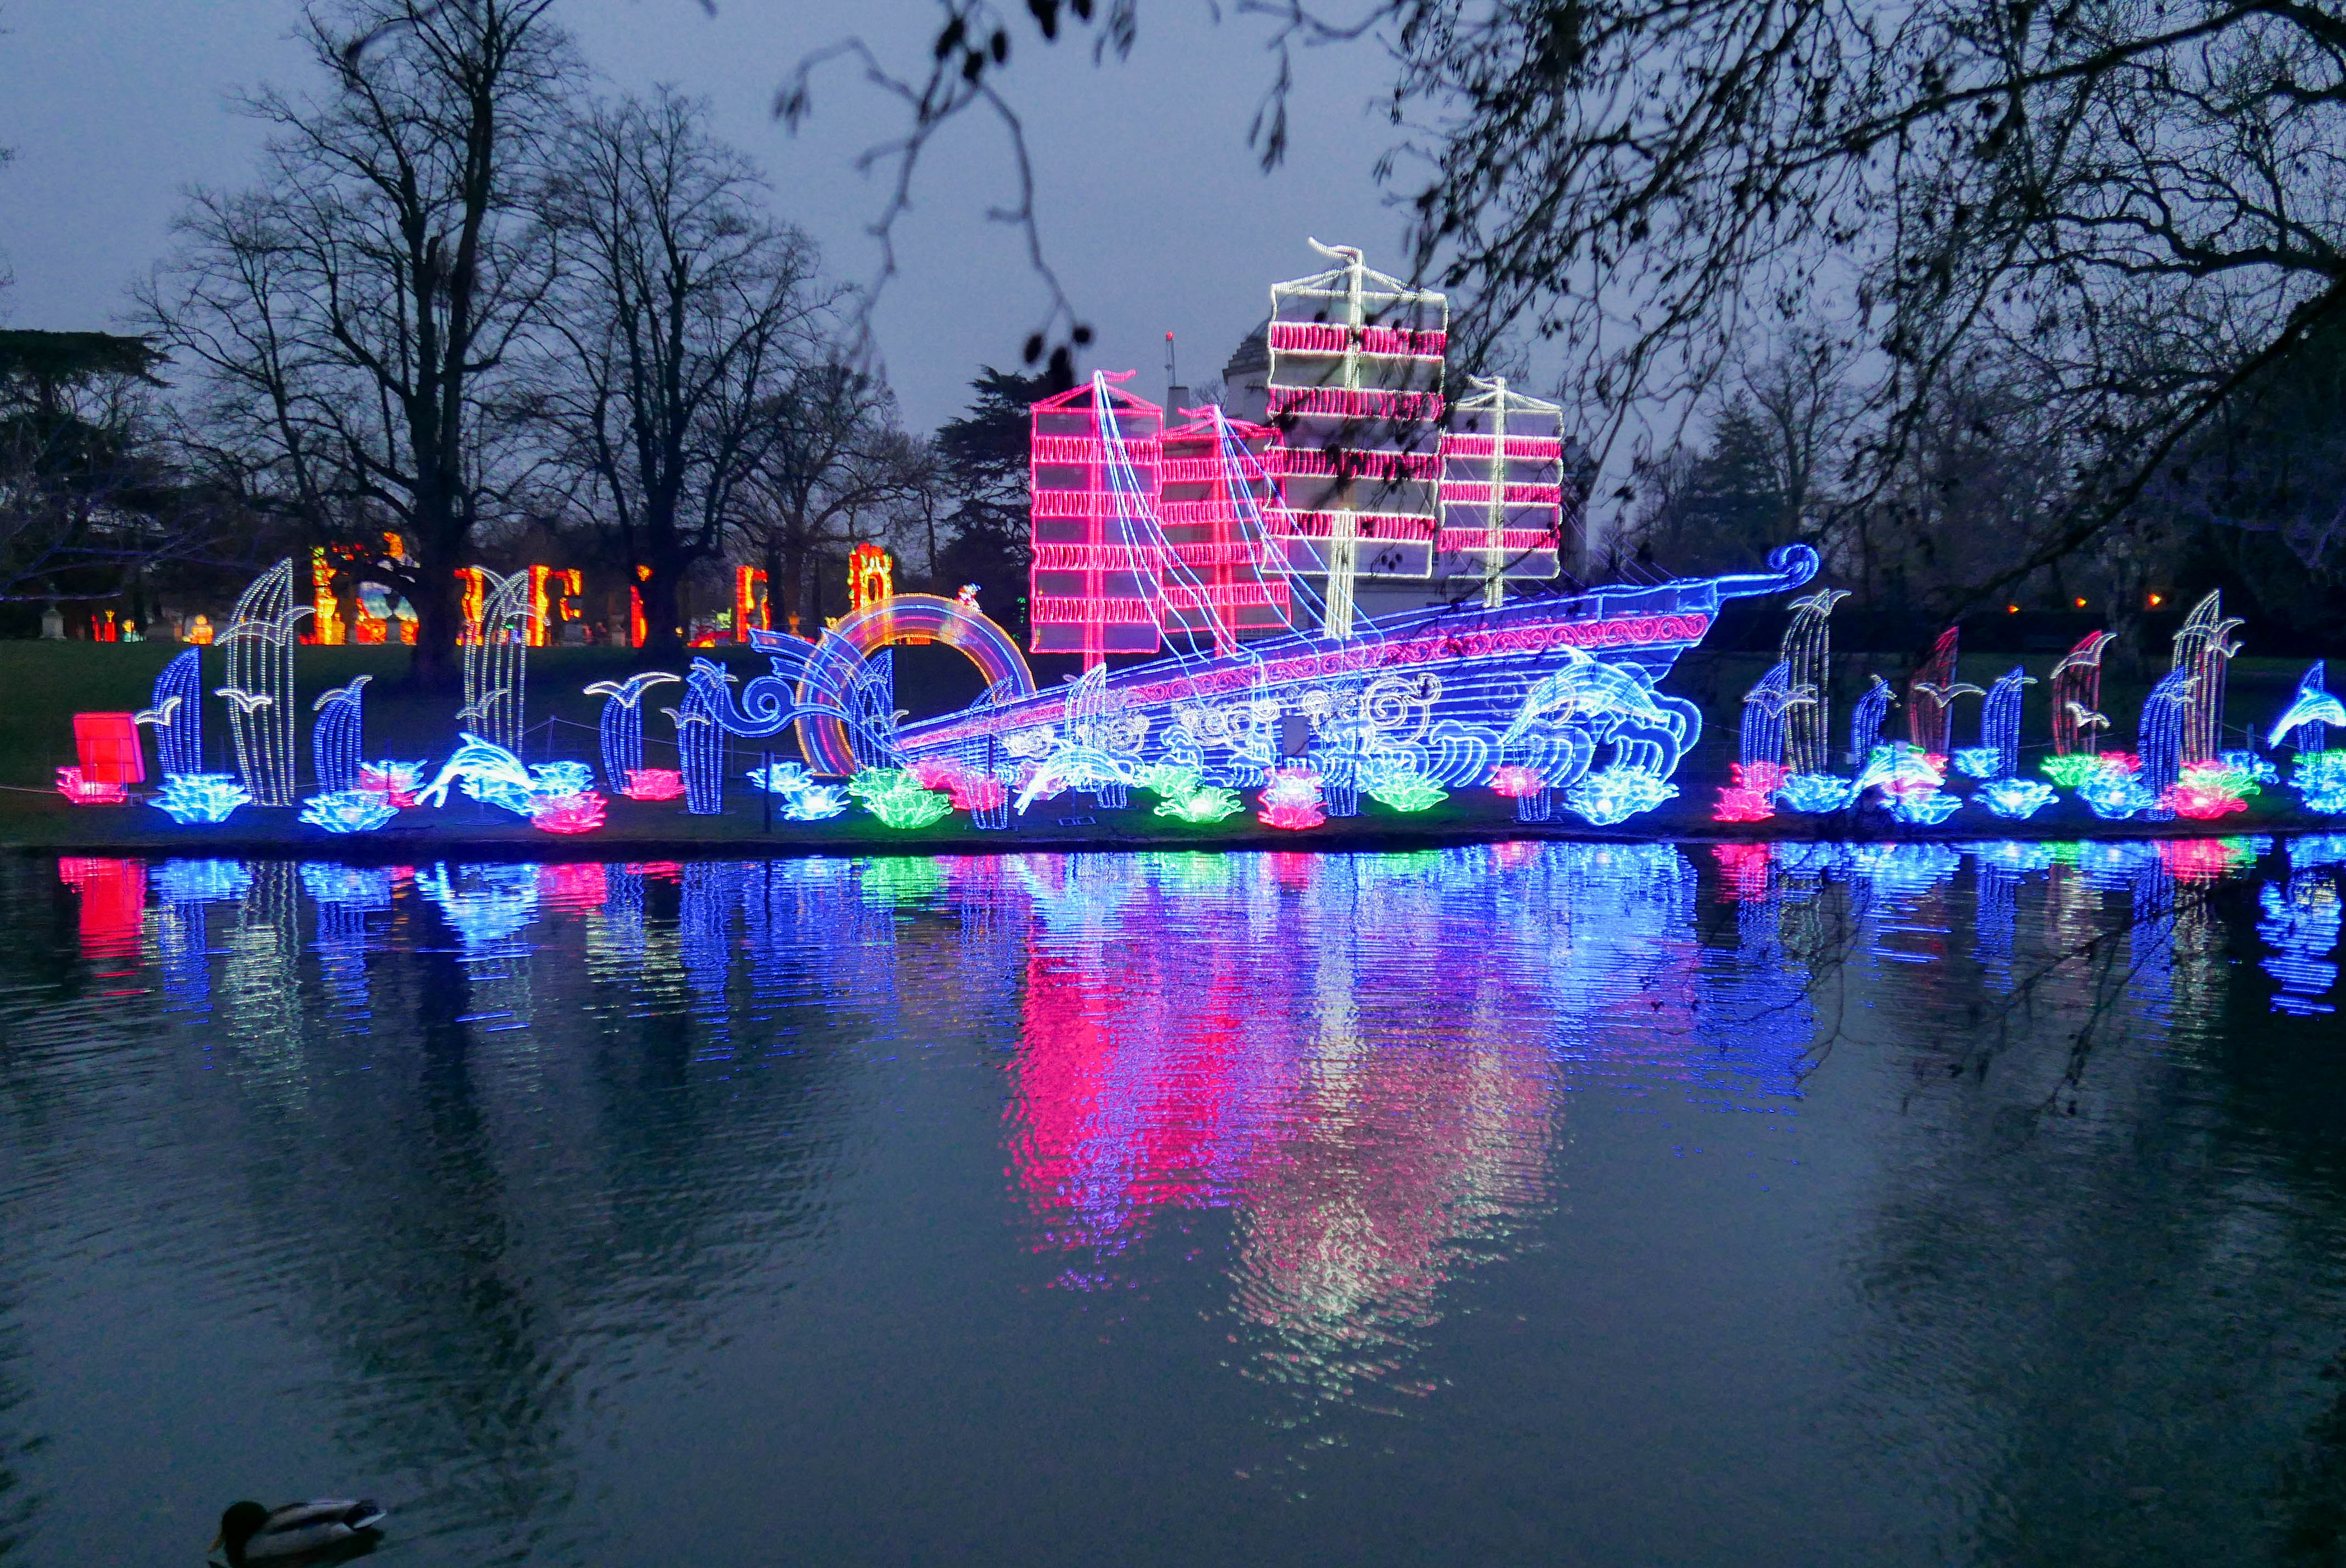 Visiting The Magical Lantern Festival –  a truly must-see!